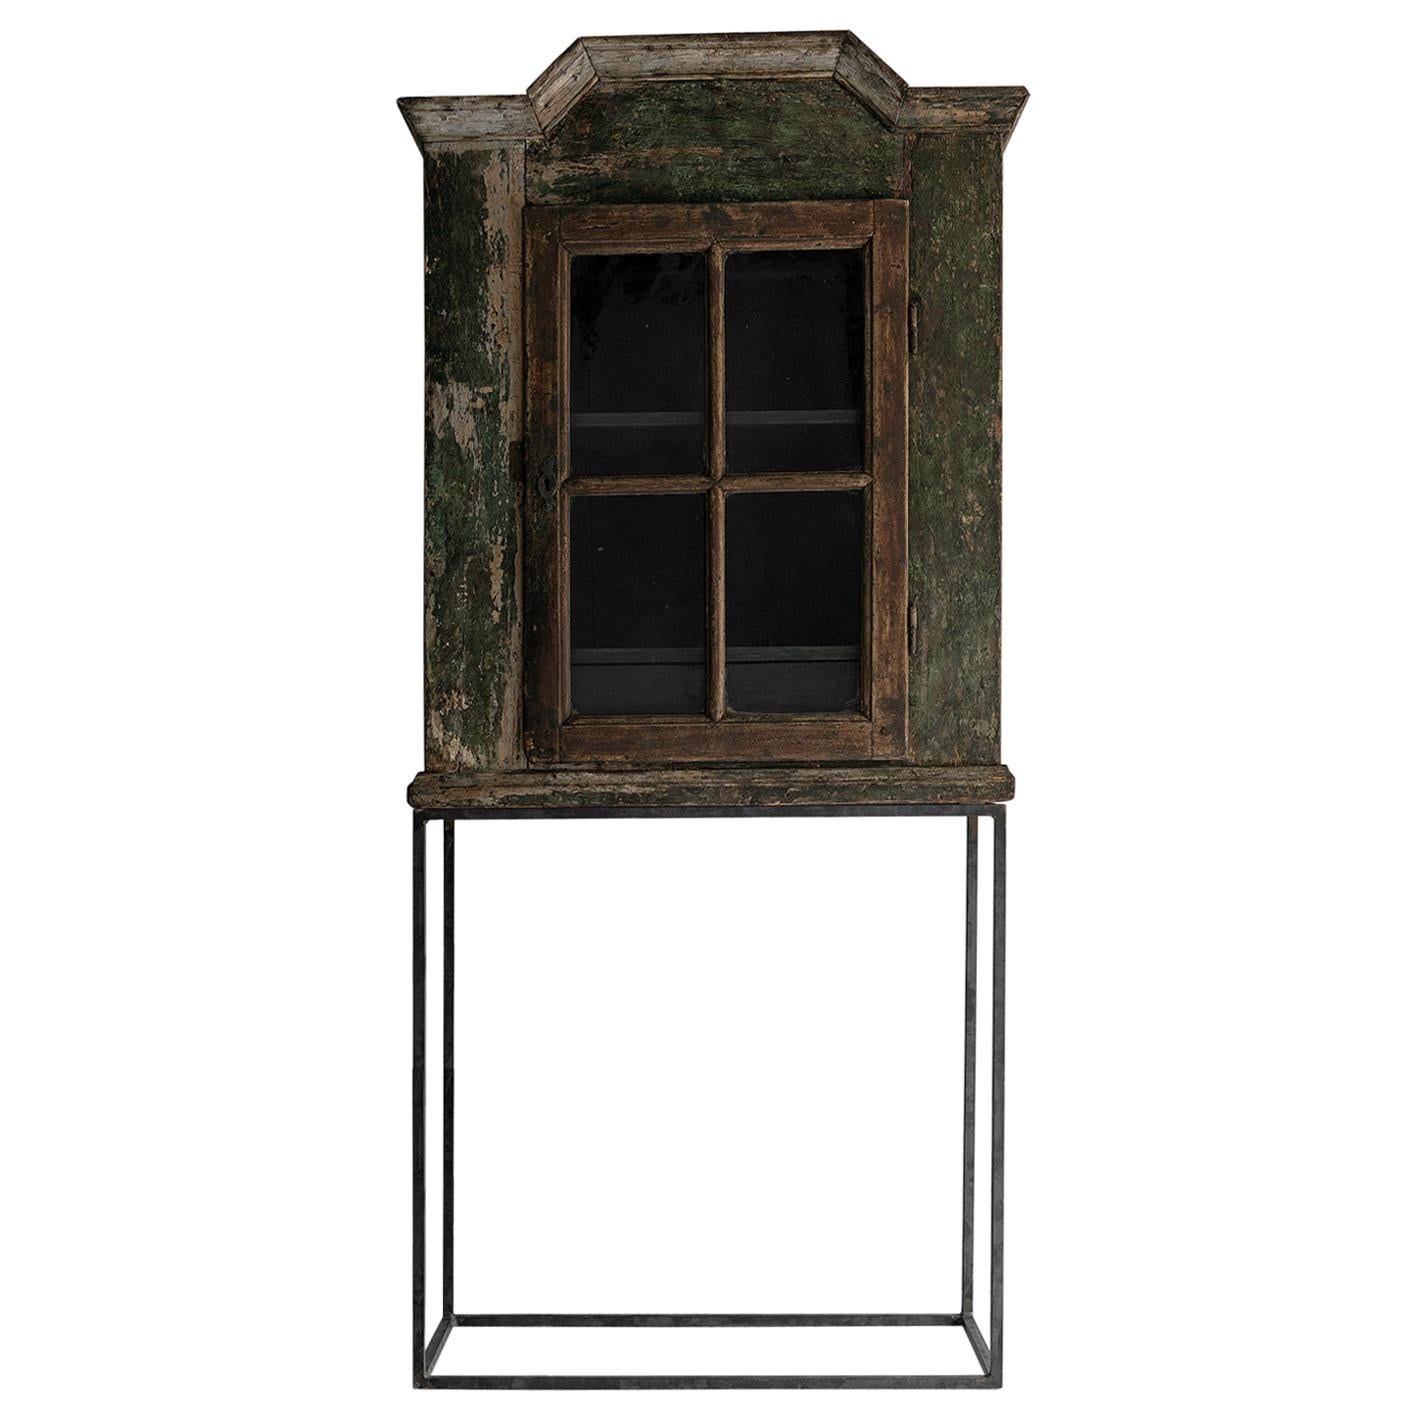 Outstanding Original 18th Century Cabinet on Modern Steel Stand